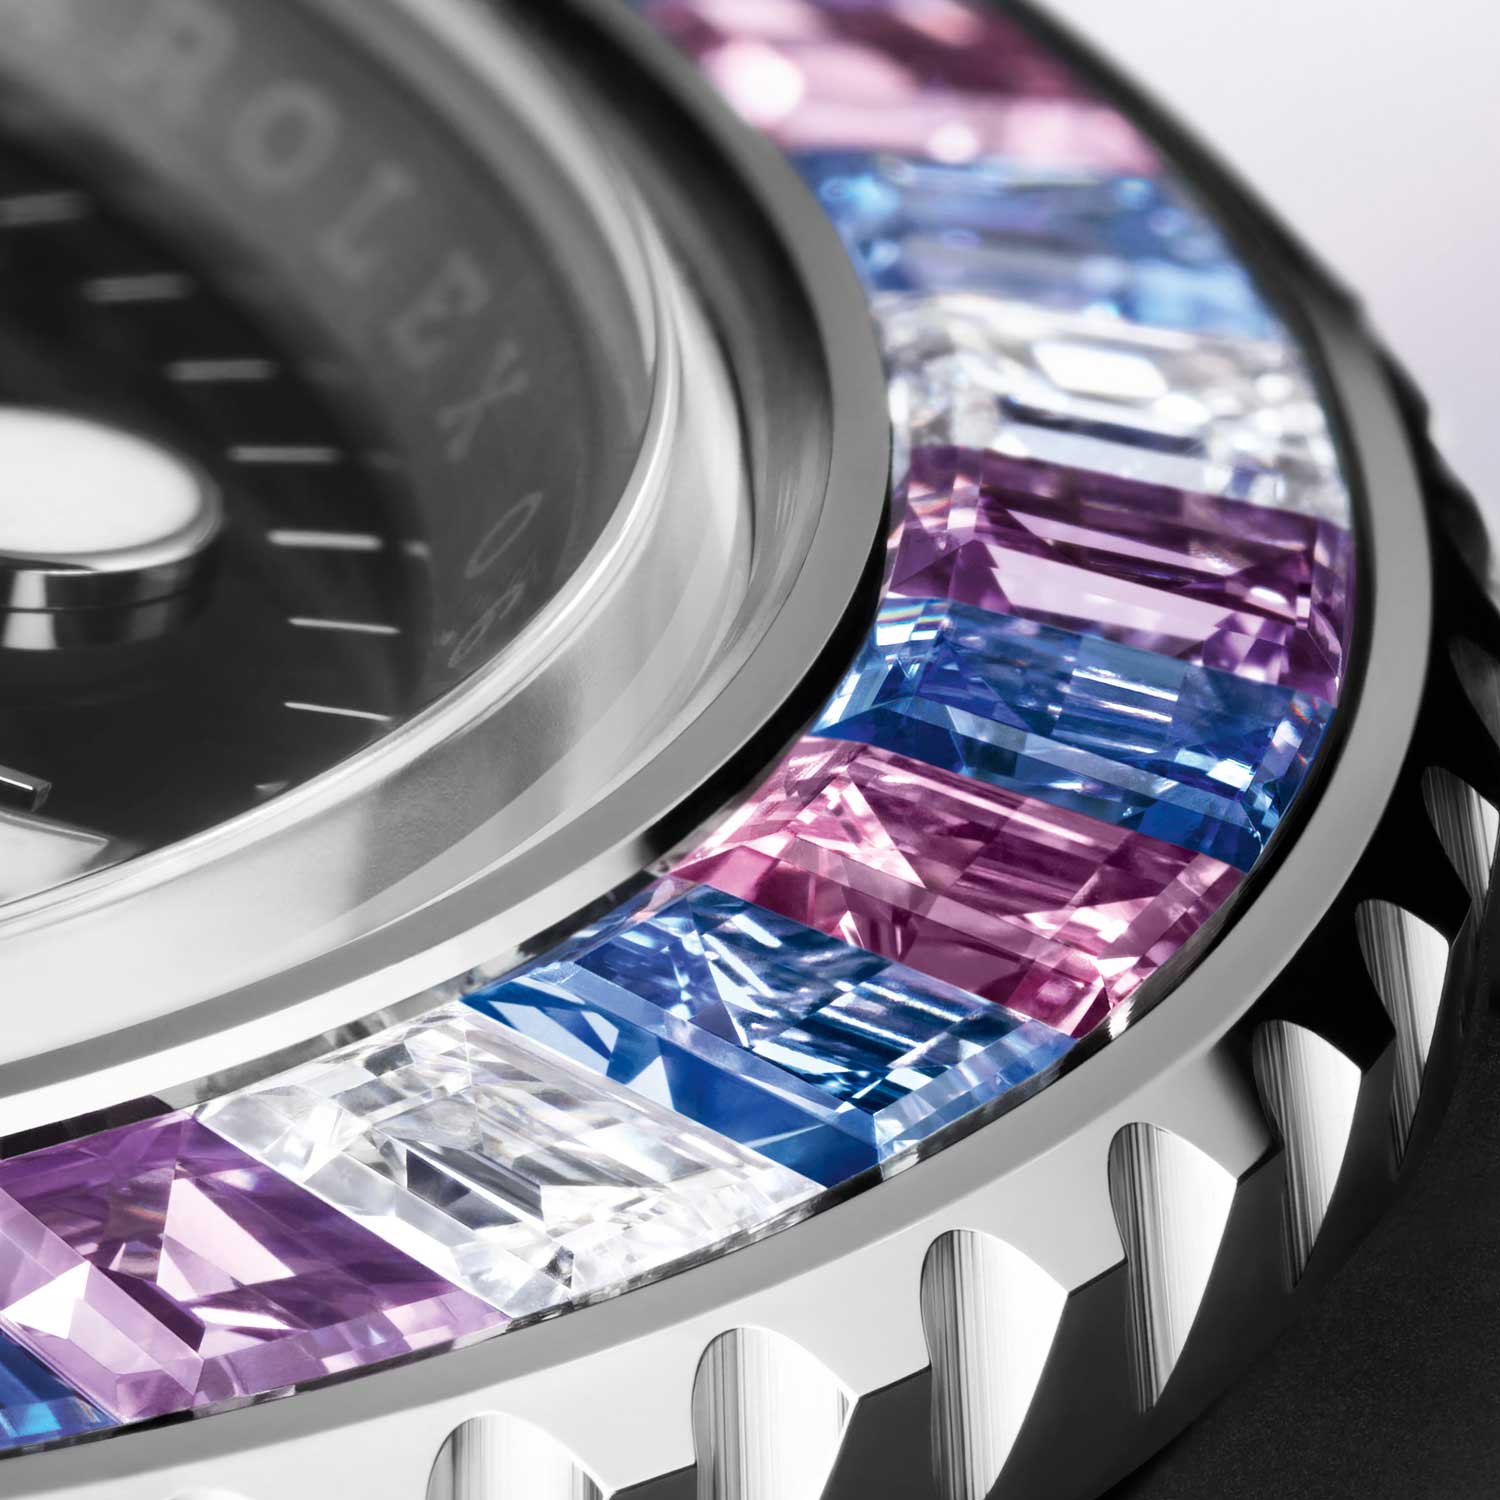 The 2022 Rolex Oyster Perpetual Yacht-Master 40 has a 18 ct white gold, bidirectional rotatable bezel set with 8 trapeze-cut diamonds (approx. 0.92 ct), 32 trapeze-cut sapphires (8 pink, 8 light blue, 8 purple and 8 dark blue) (approx. 4.27 ct) and one triangular diamond (approx. 0.15 ct) at 12 o’clock